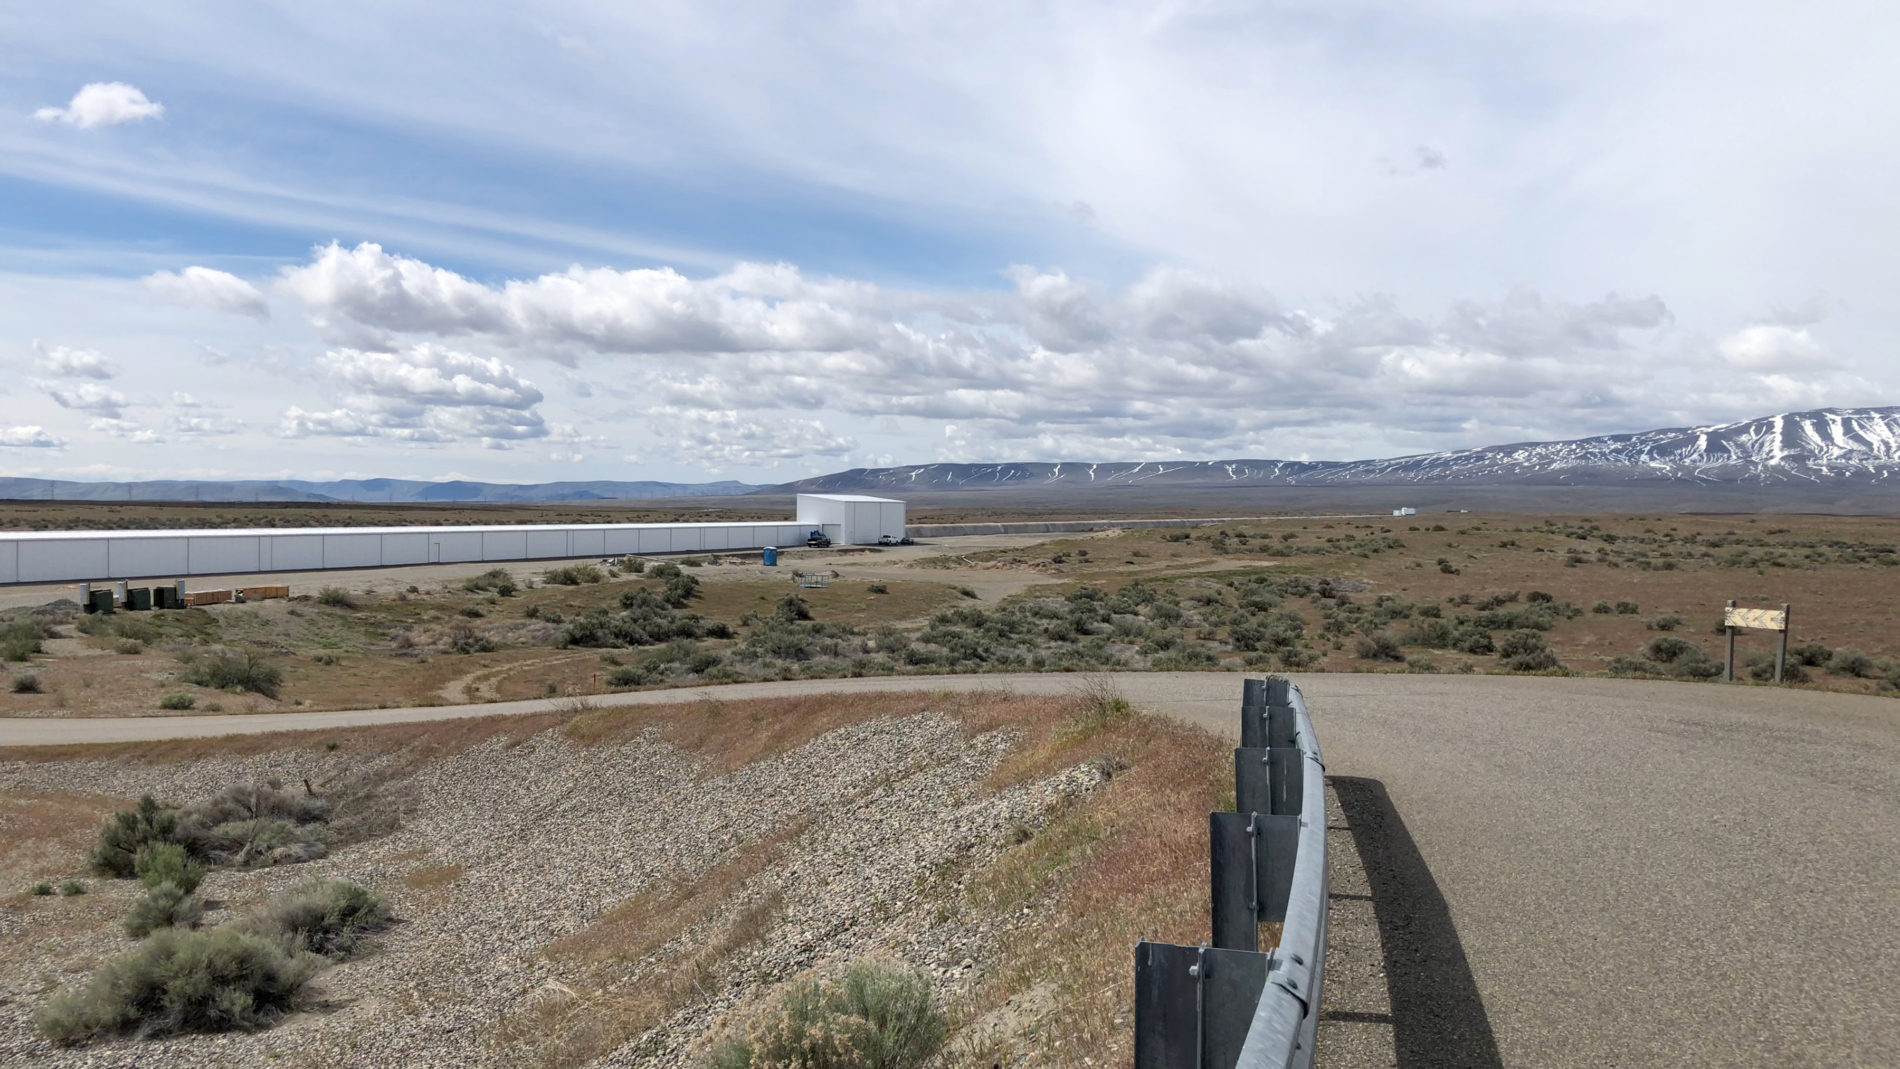 A view of the 2.5 mile long vacuum tube at LIGO, located in Hanford.